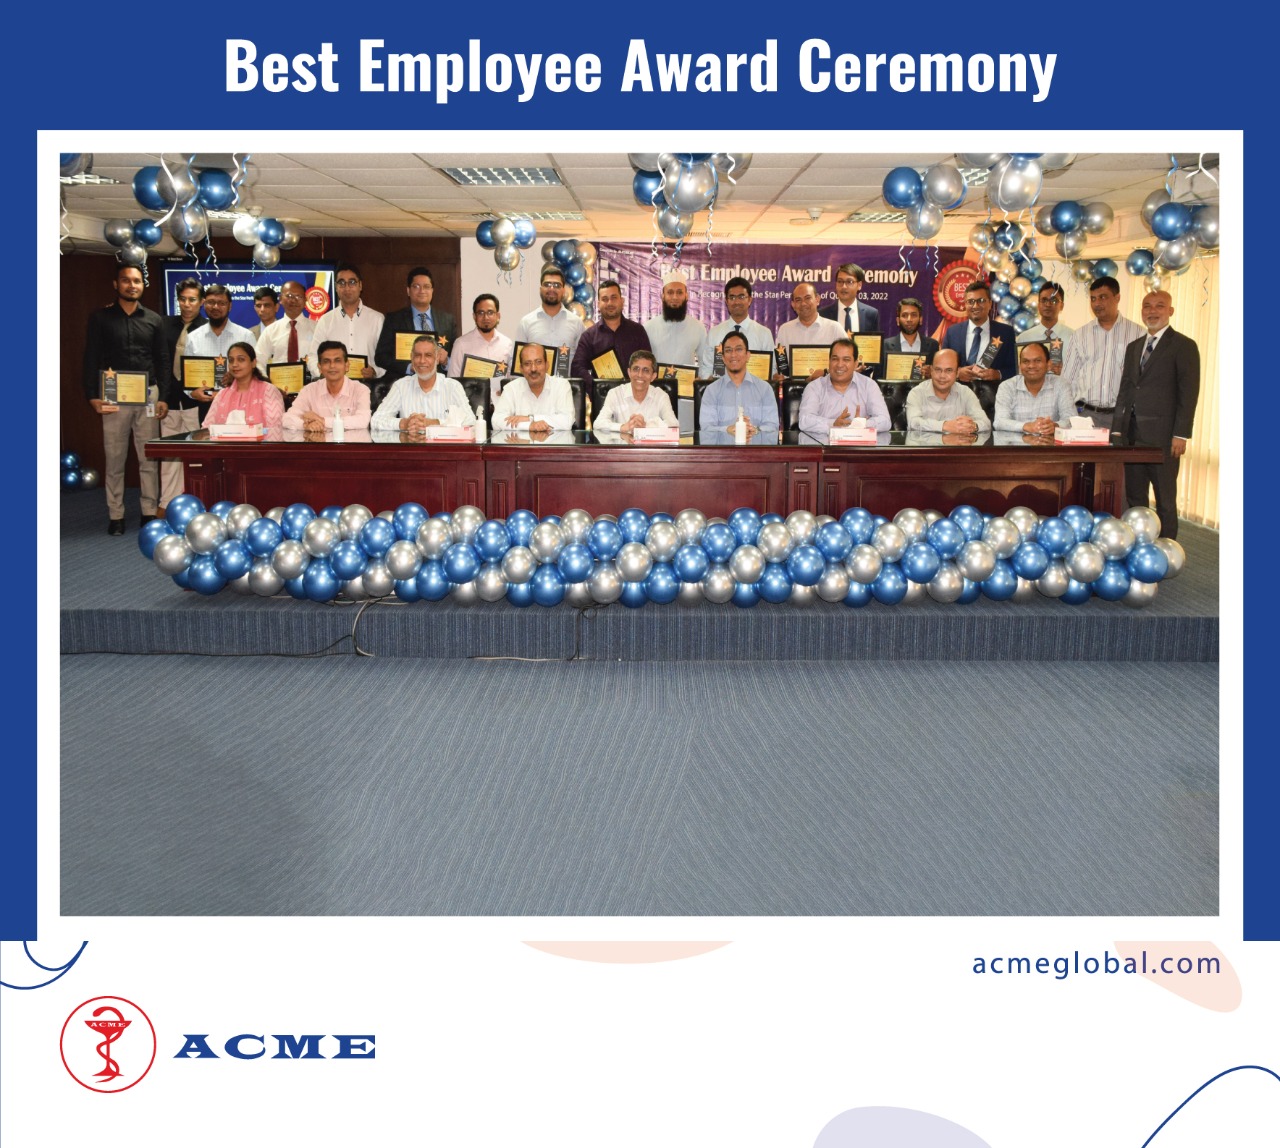 ACME holds the ”Best Employee Award Ceremony” for star performers